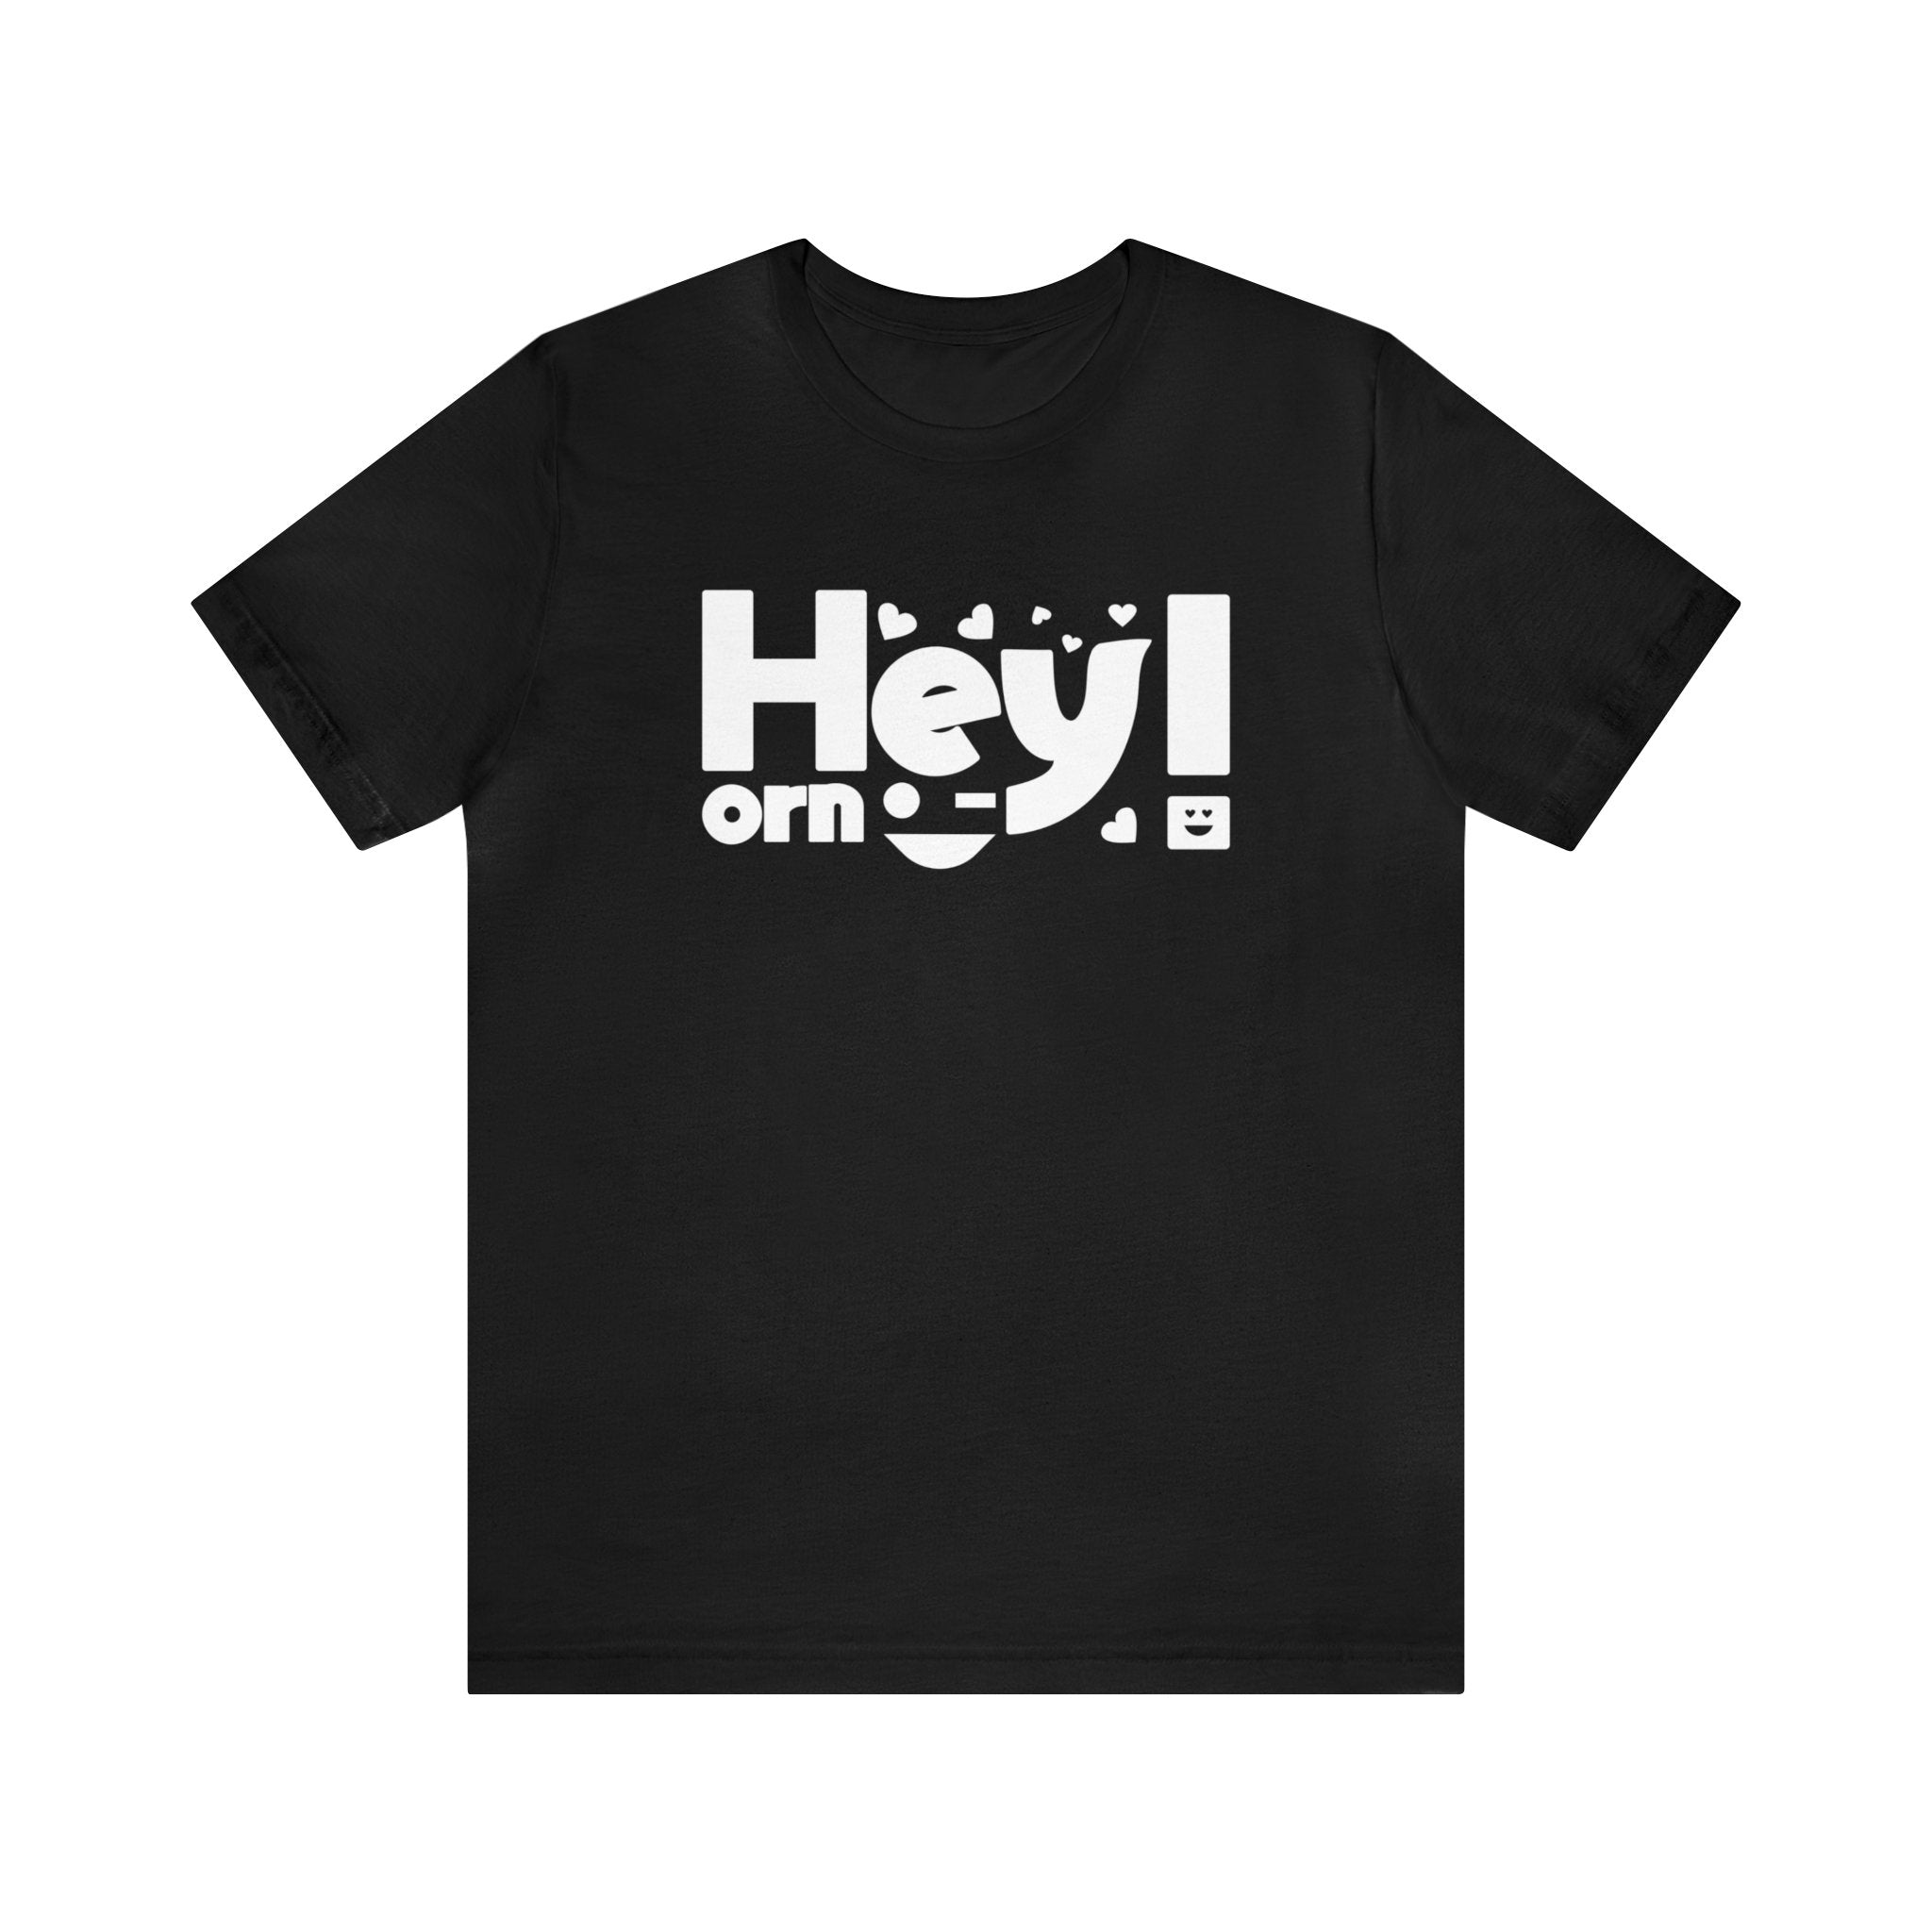 A stylish Hey-rny T Shirt with white text, perfect for making a fashion statement.